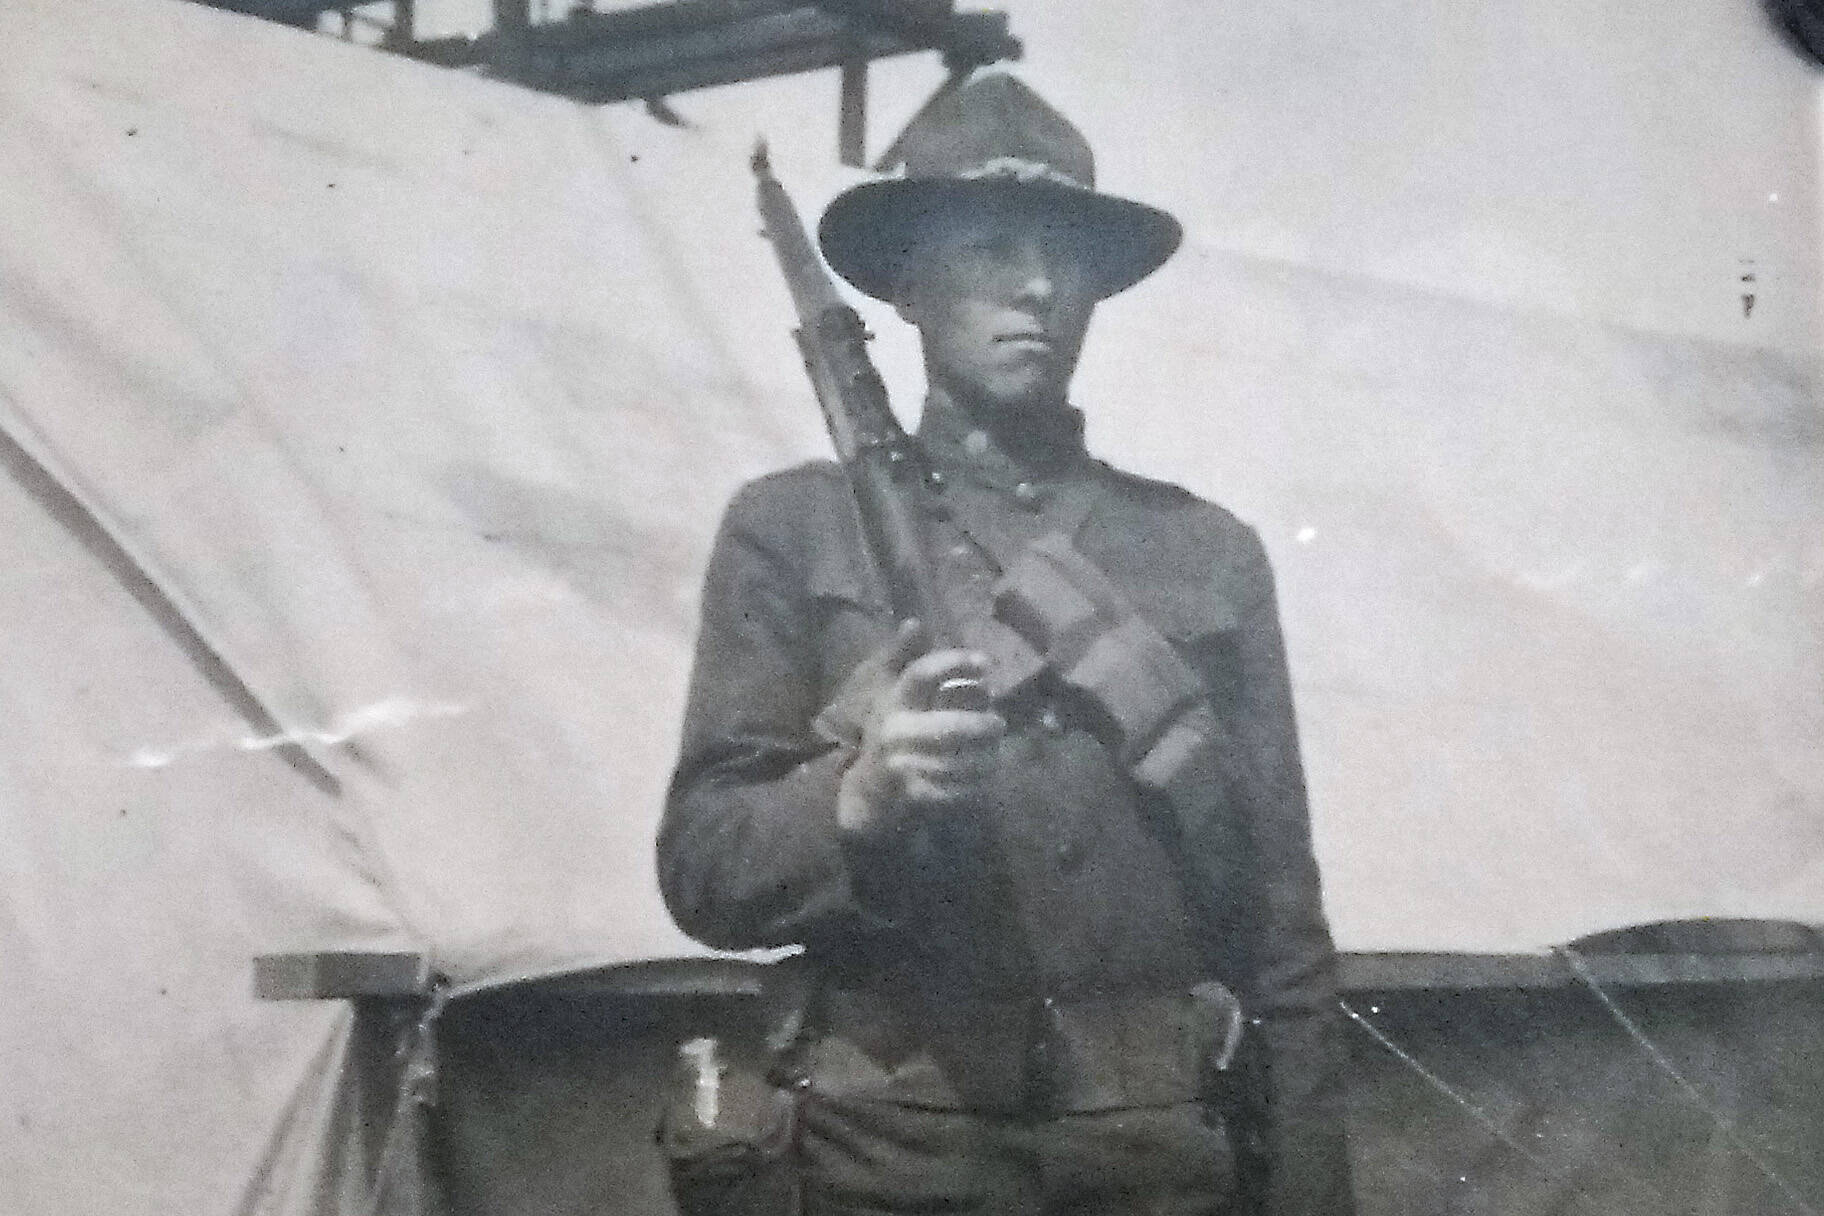 John Floyd King served in the elite Rainbow Division during World War I. By the end of his tenure, he was a machine gunner fighting in France. (Photo courtesy of the Brennan Family Collection)